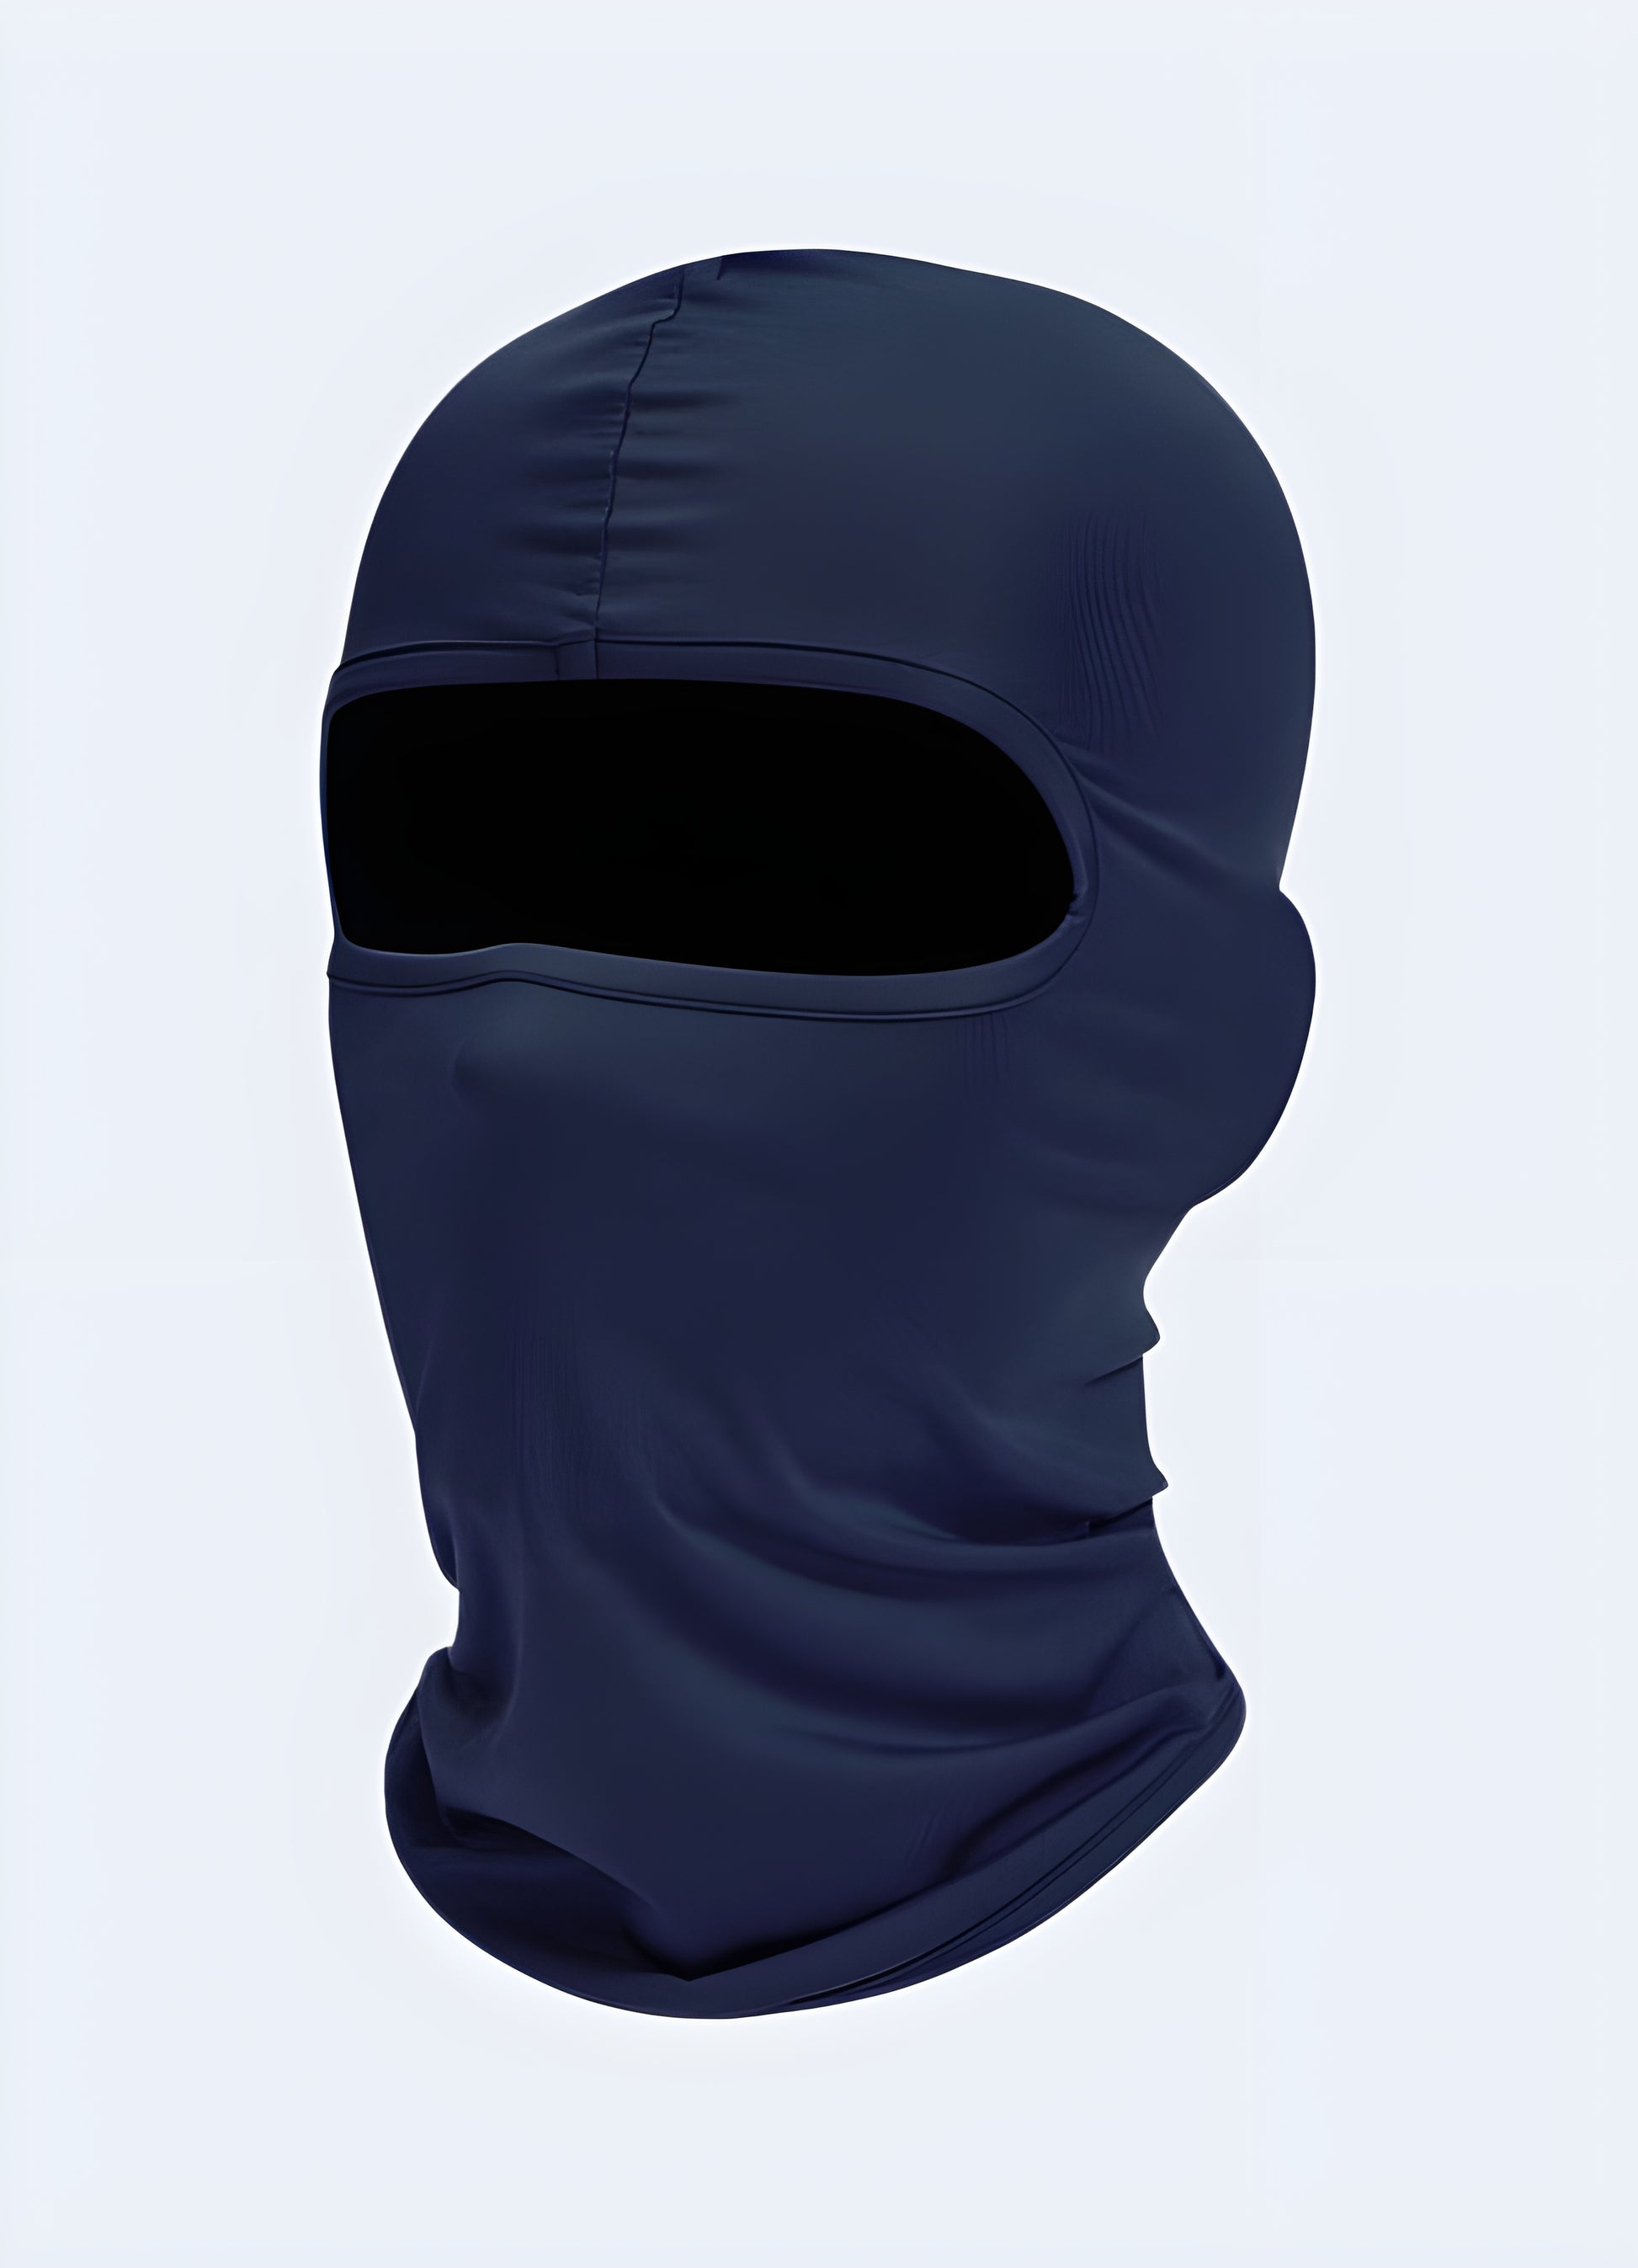 See how the balaclava seamlessly blends with your environment. Stay hidden, stay protected.